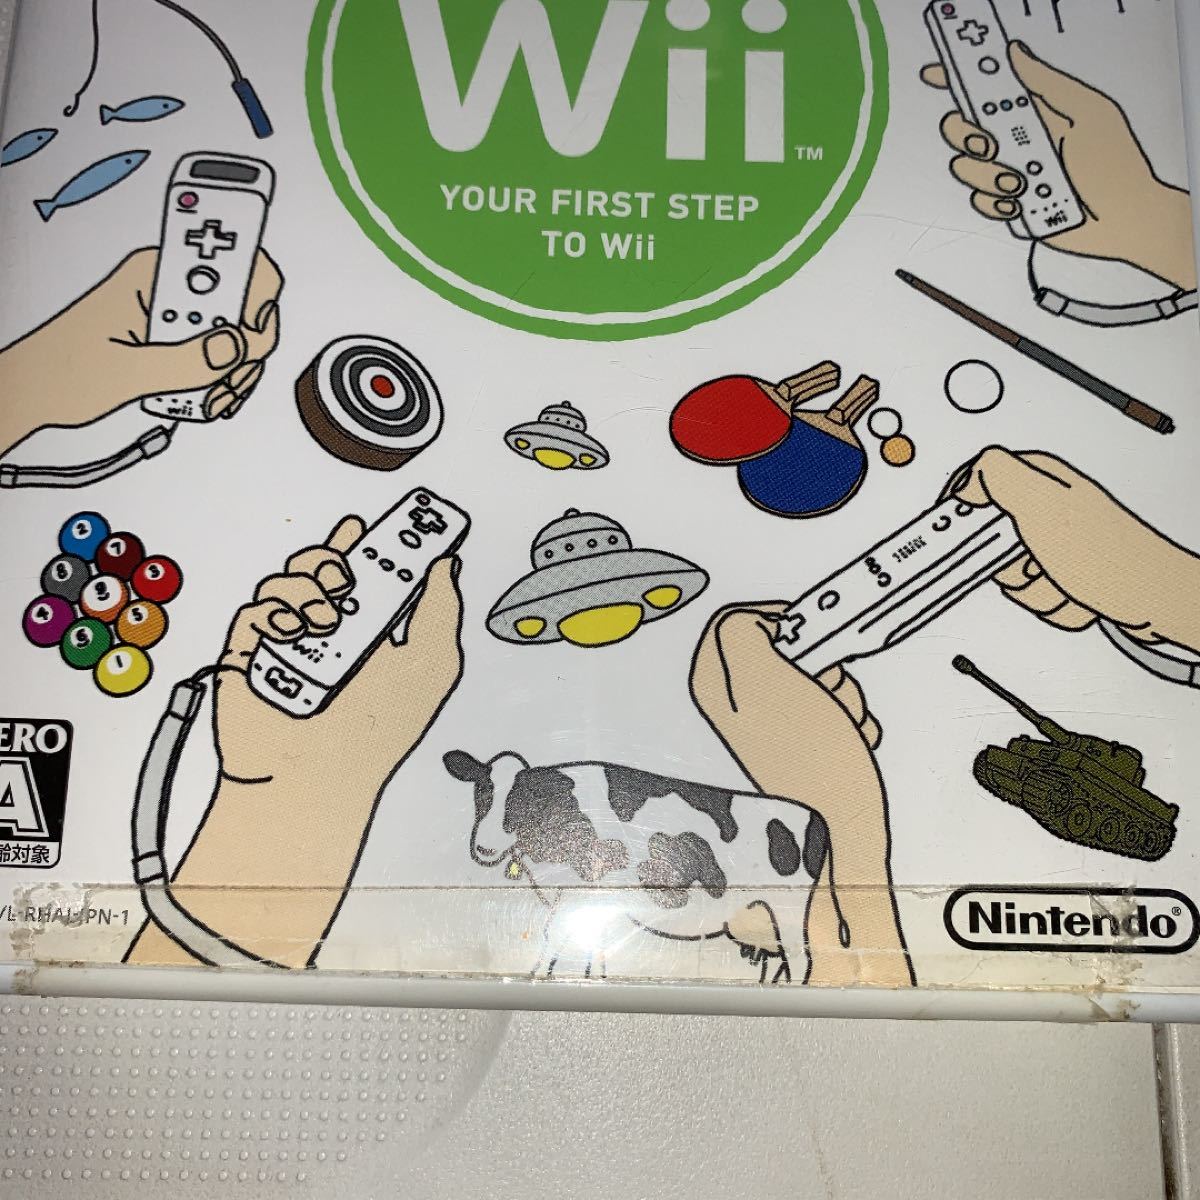 Wii本体　Wiifit すぐ遊べます！